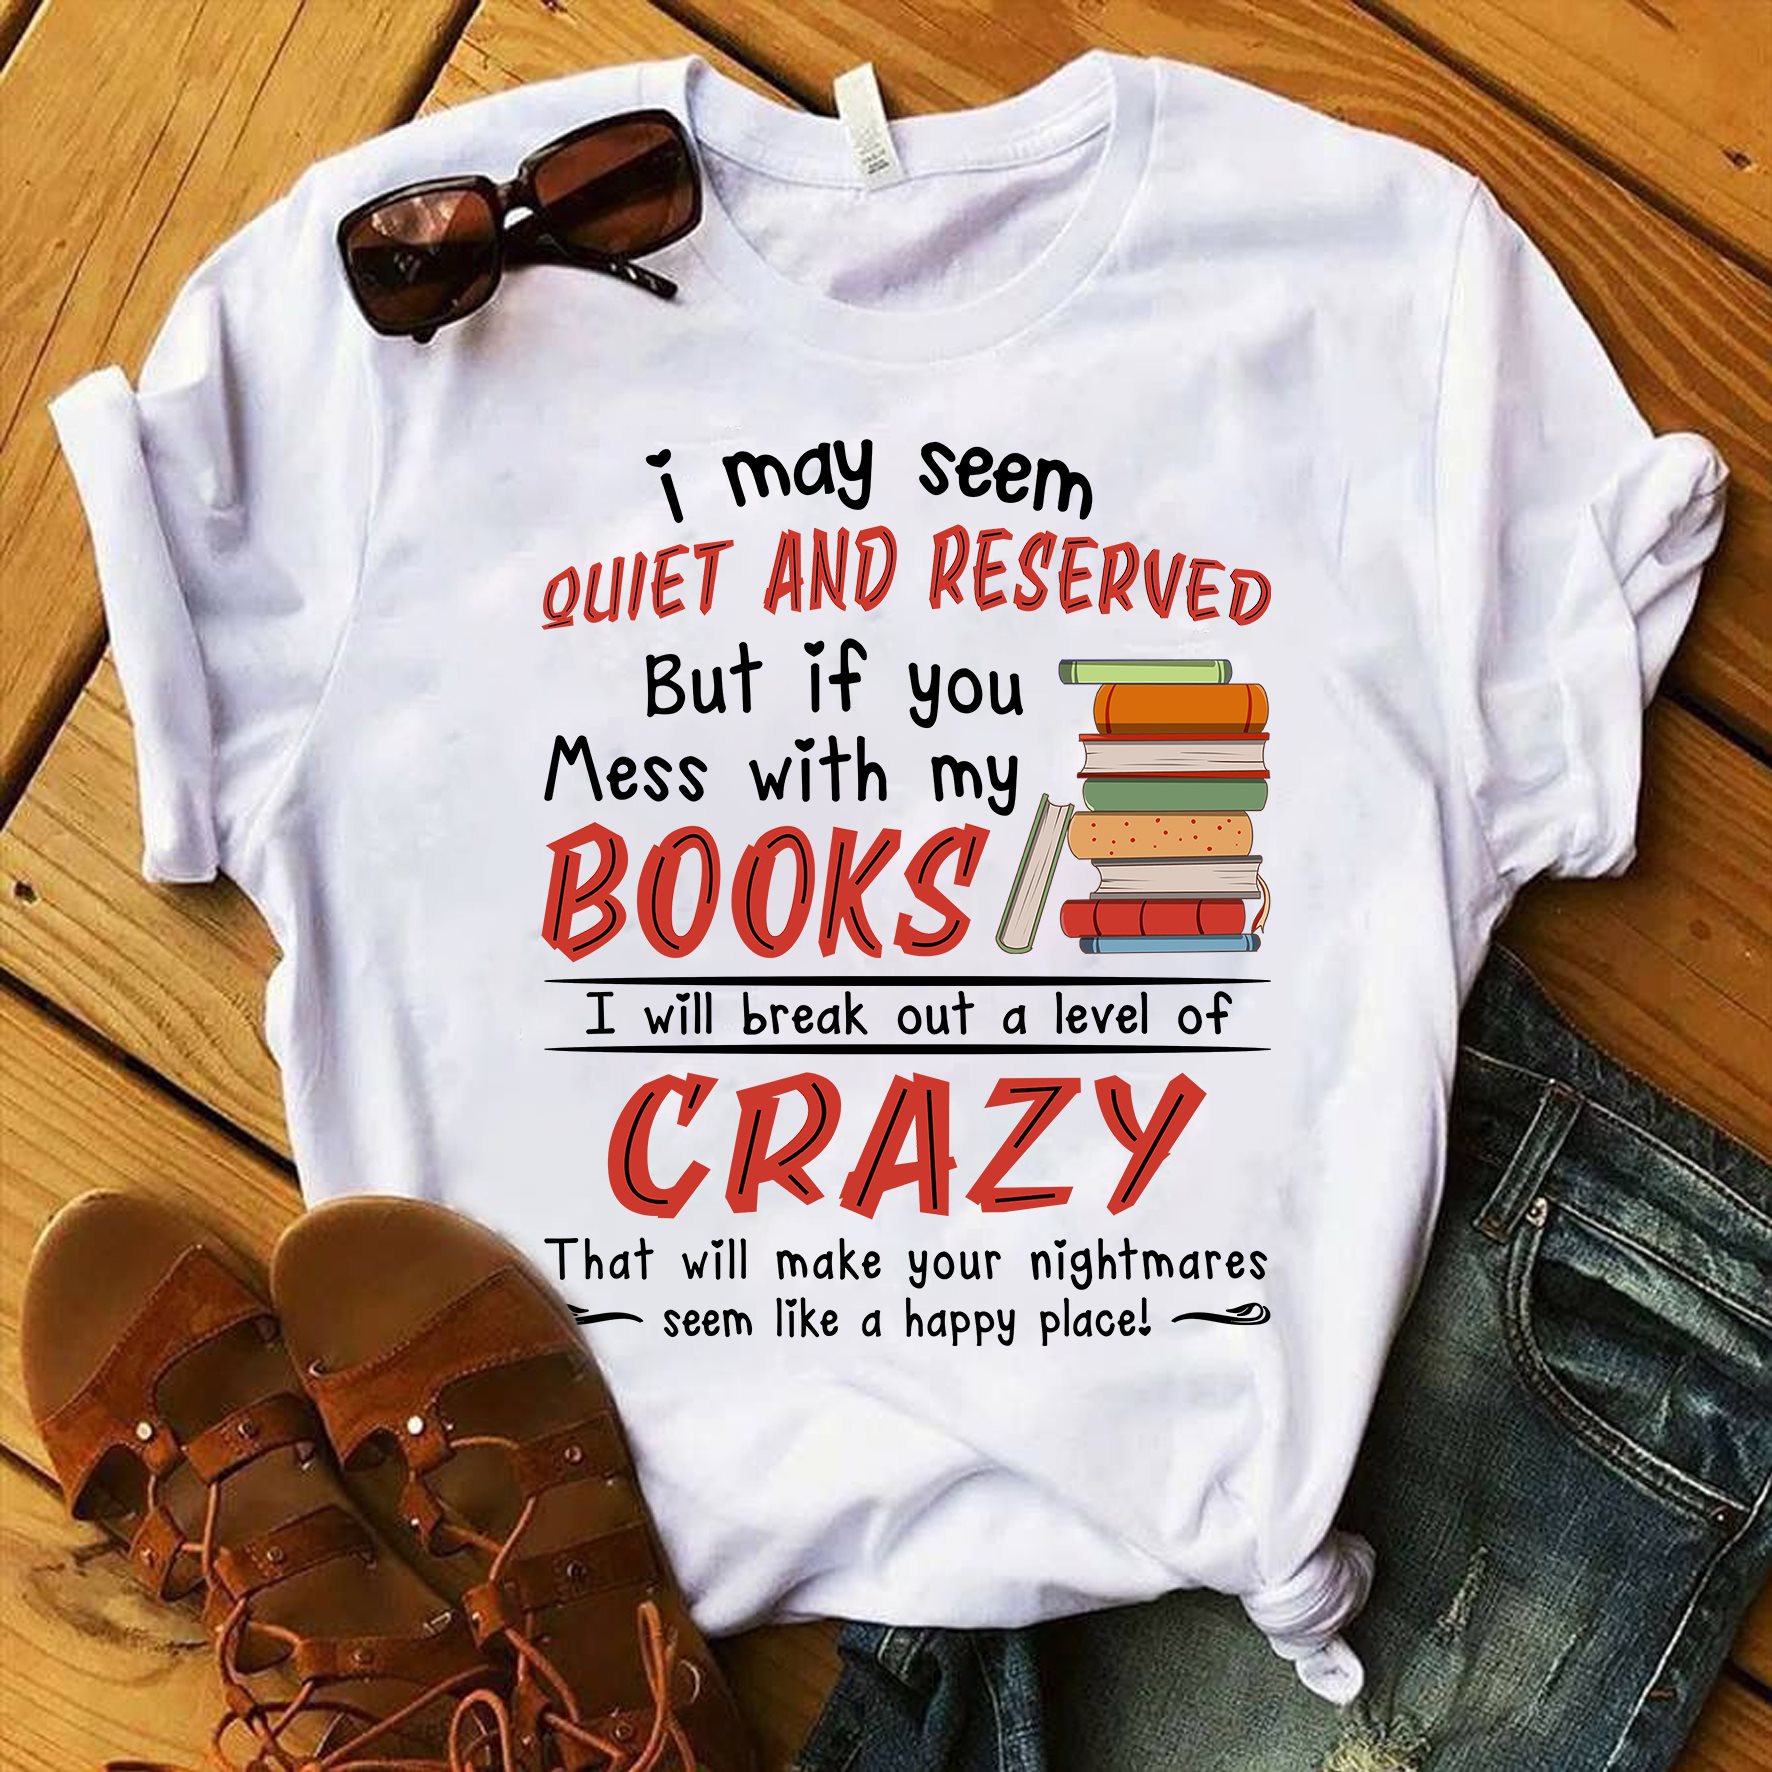 I may seem quiet and reserved but if you mess with my books I will break out a level of crazy